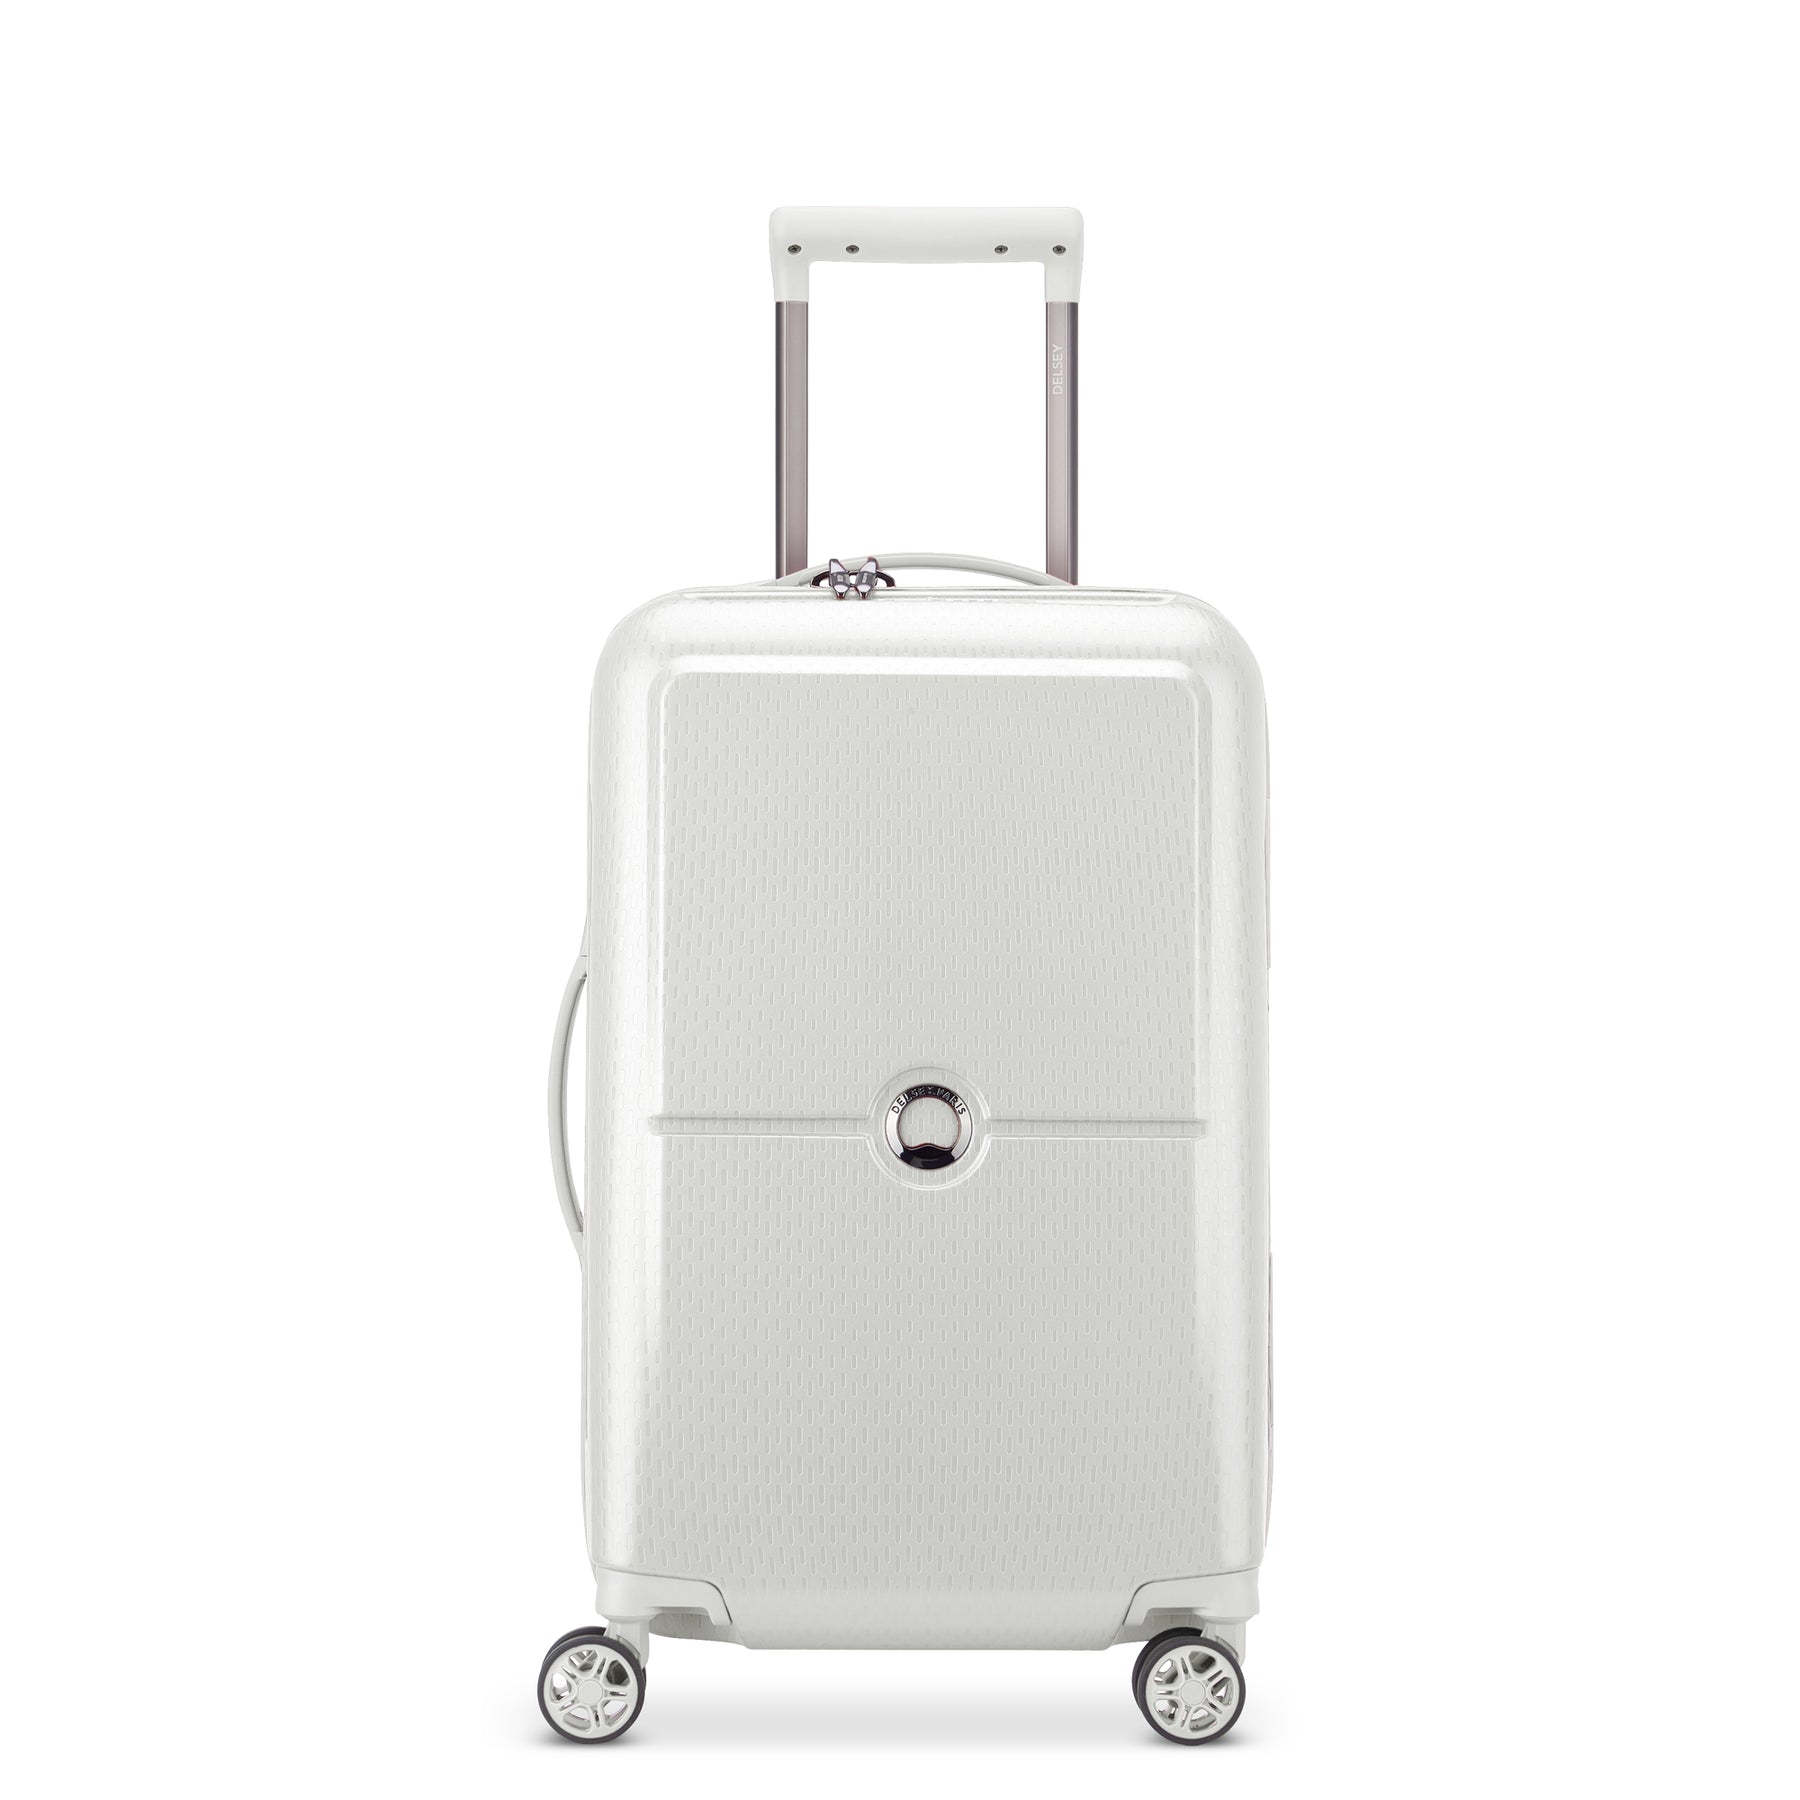 Delsey Chatelet Luggage: Your Ultimate Travel Companion